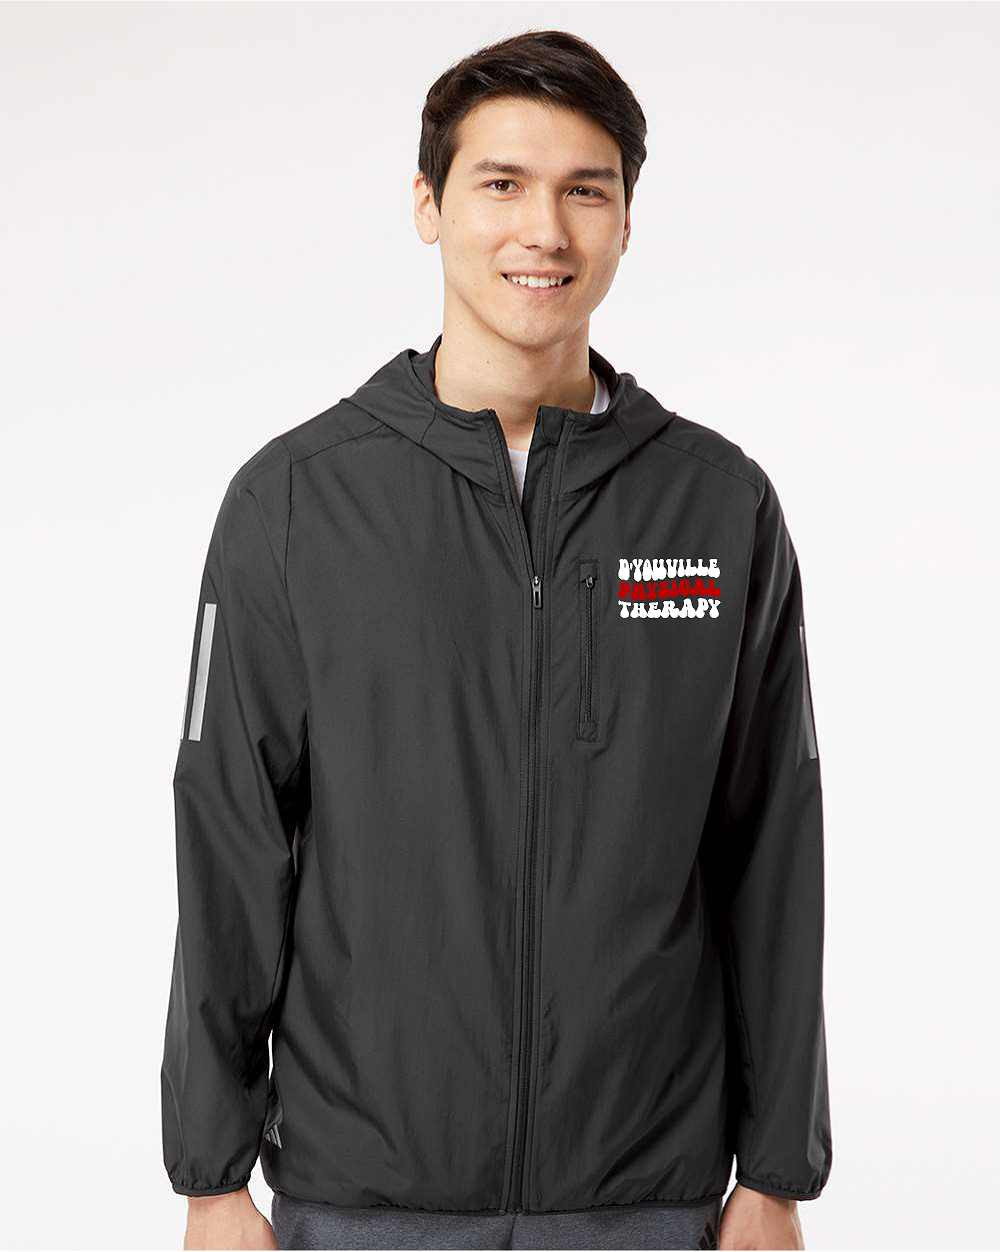 D'Youville Physical Therapy Adidas - Hooded Full-Zip Windbreaker - A524